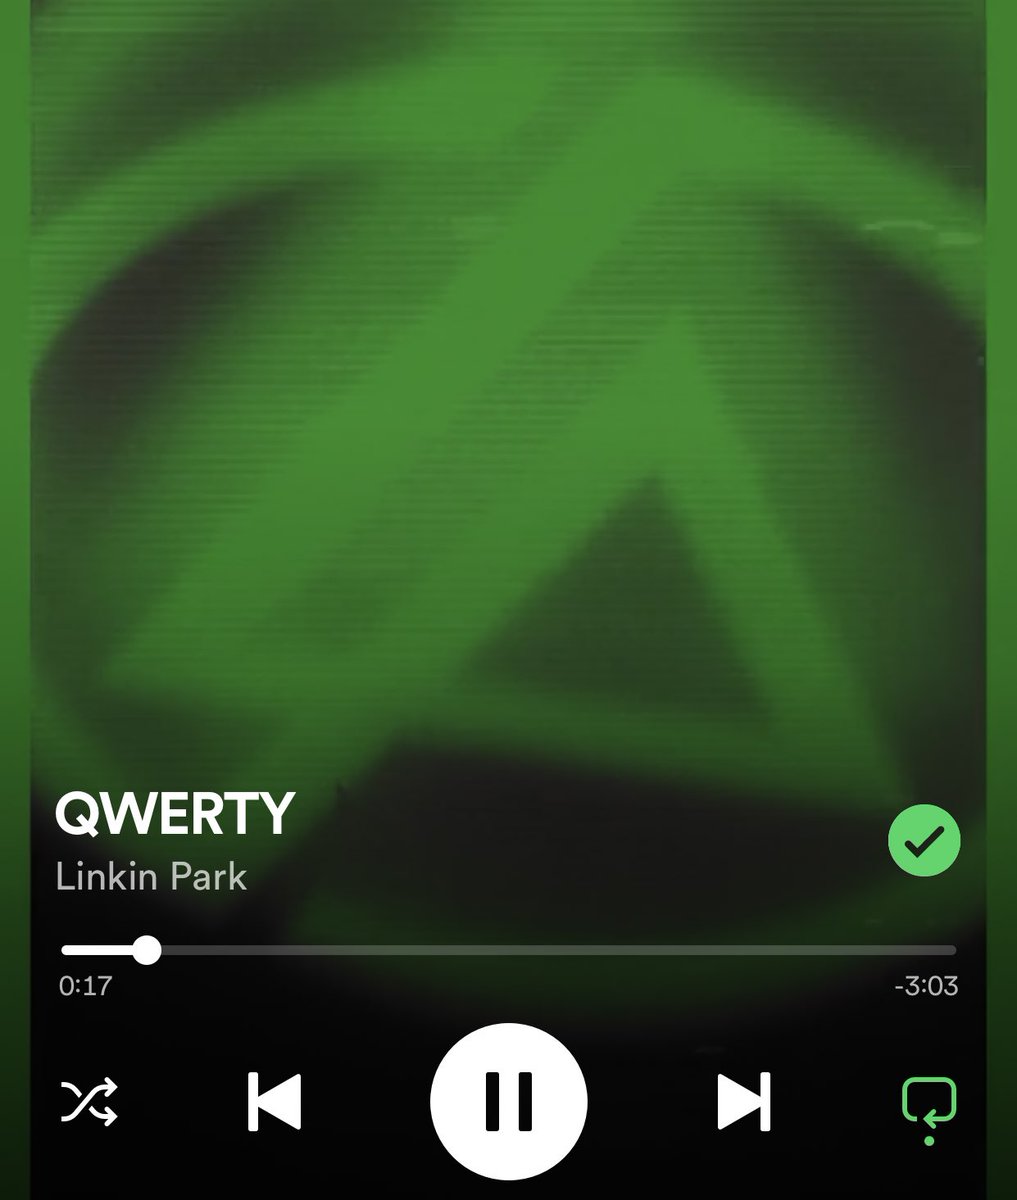 IT IS HEEEEERE🔥
QWERTY IS OFFICIALLY ON STREAMING💚💚

thank you @linkinpark🫶🏻